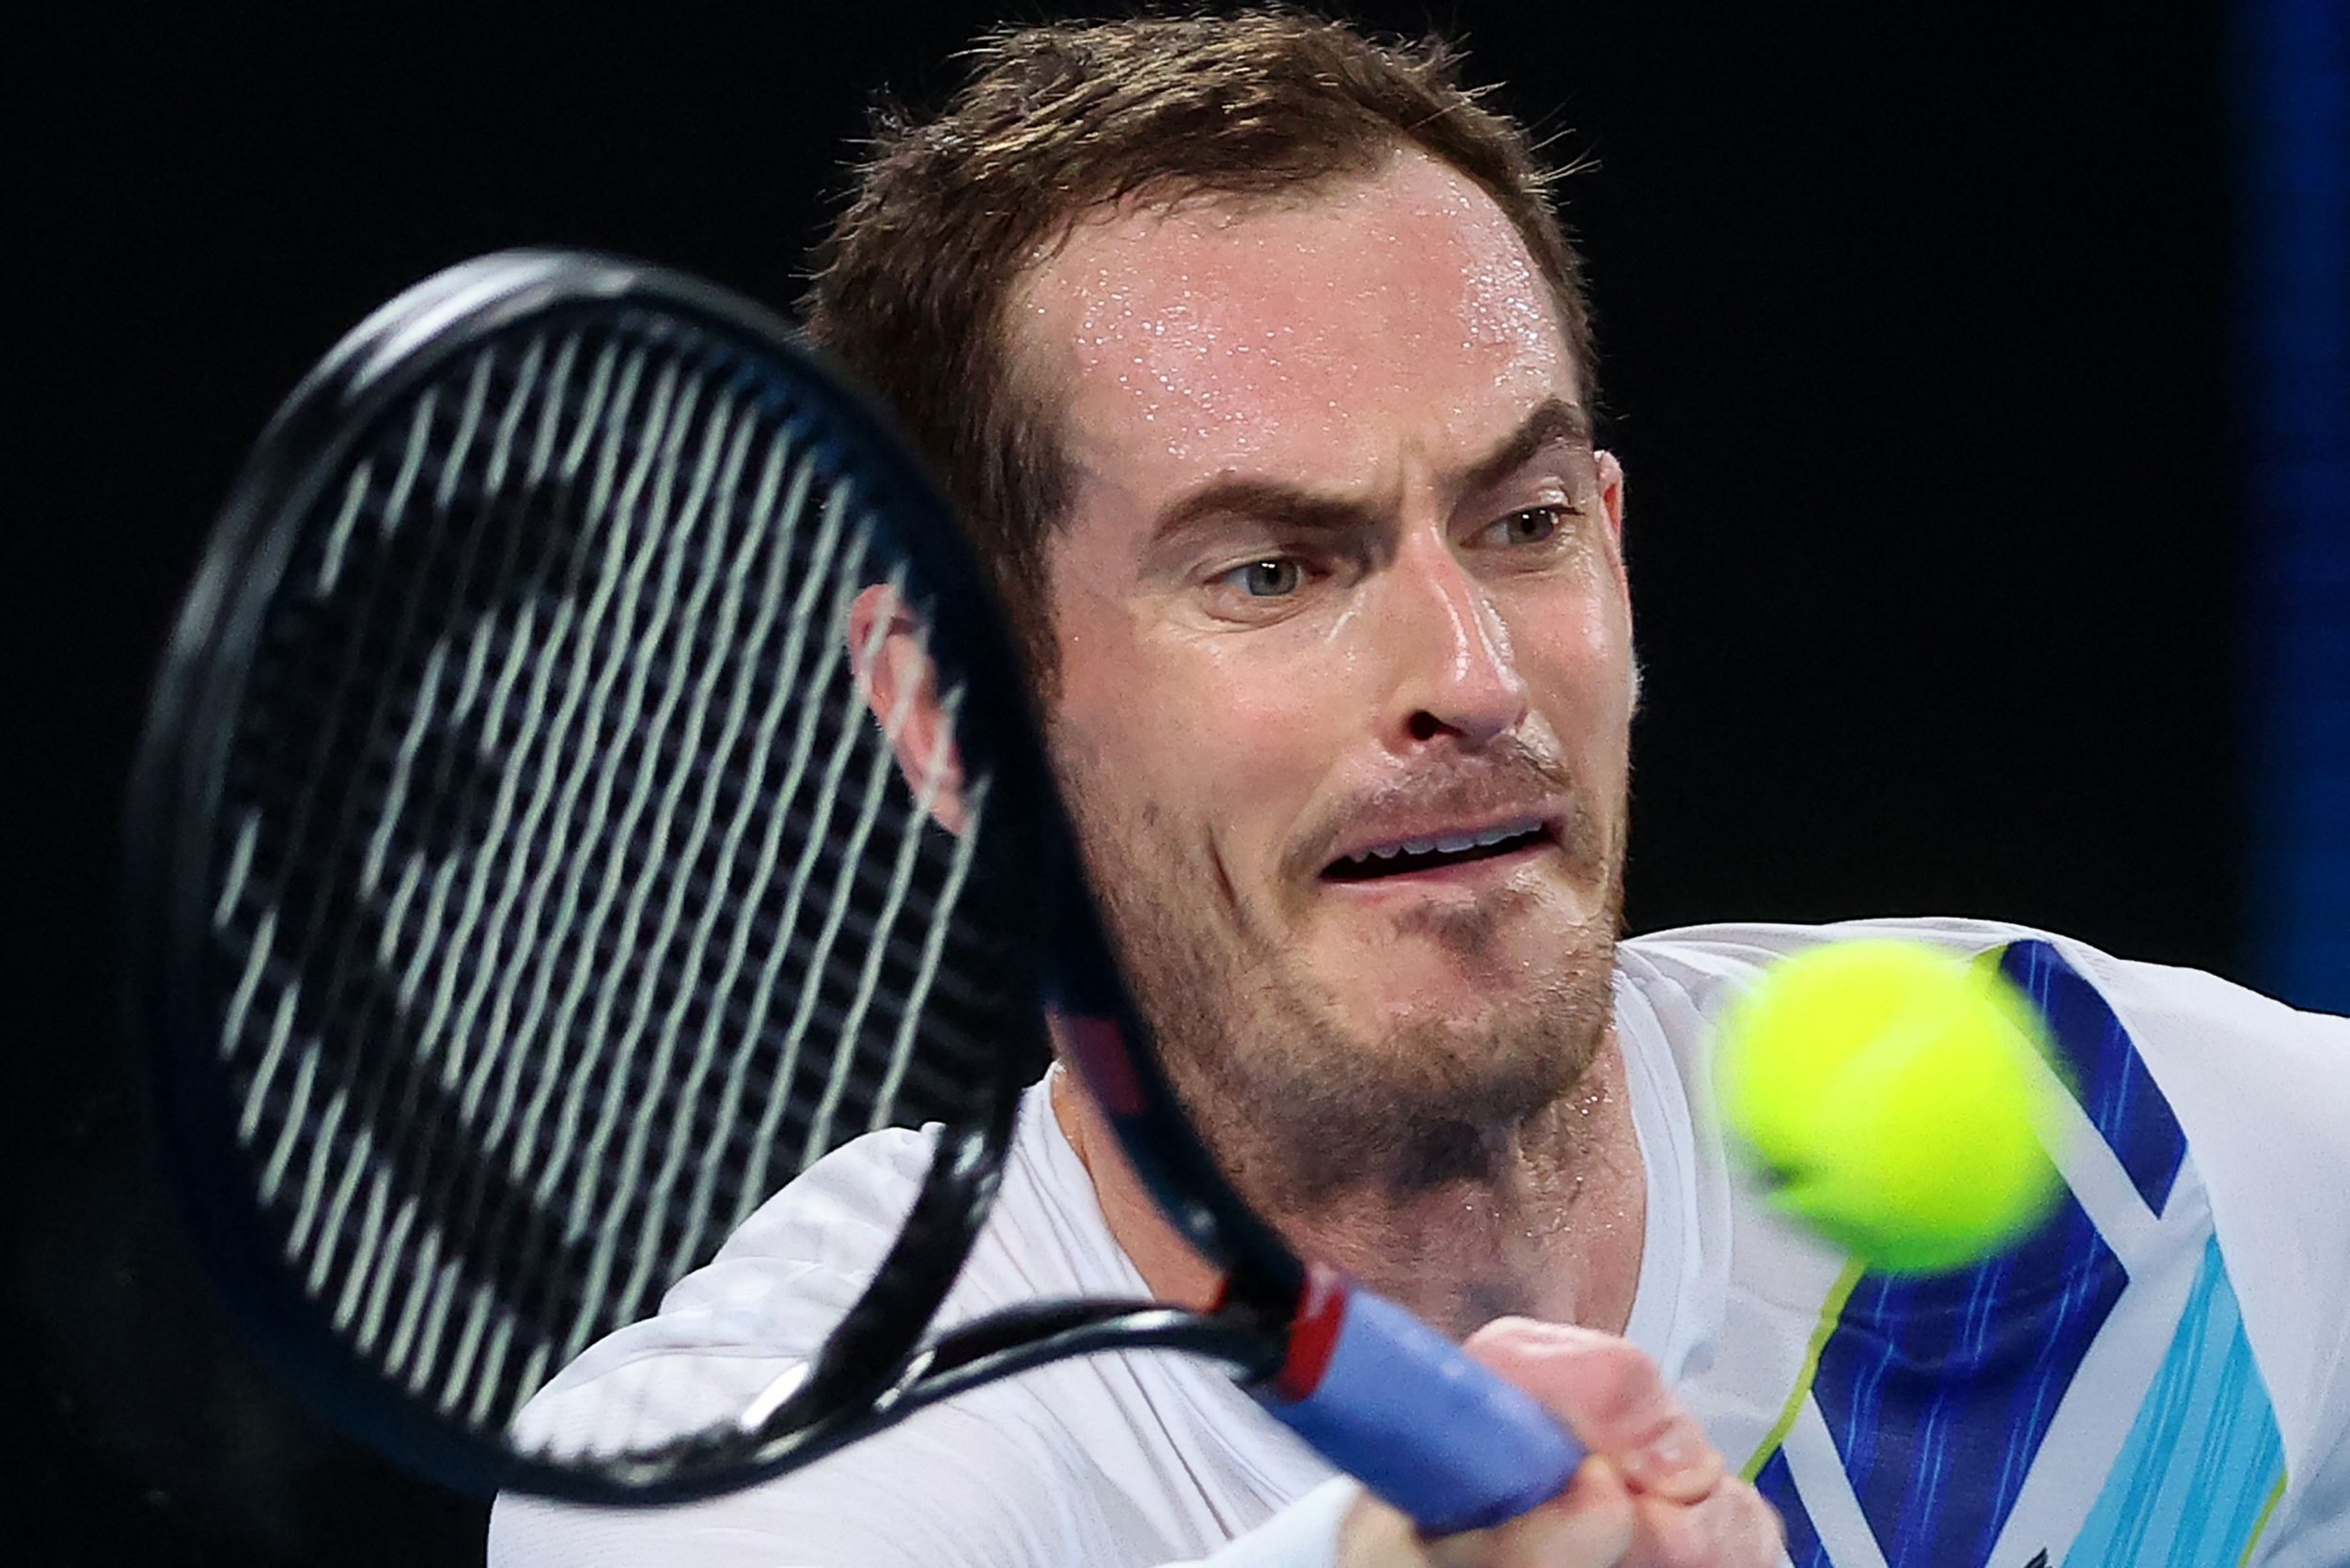 Andy Murray of Britain hits a return against Nikoloz Basilashvili of Georgia during their men's singles match at the Sydney Classic tennis tournament in Sydney on January 12, 2022. (Photo by DAVID GRAY / AFP) / -- IMAGE RESTRICTED TO EDITORIAL USE - STRICTLY NO COMMERCIAL USE -- (Photo by DAVID GRAY/AFP via Getty Images)